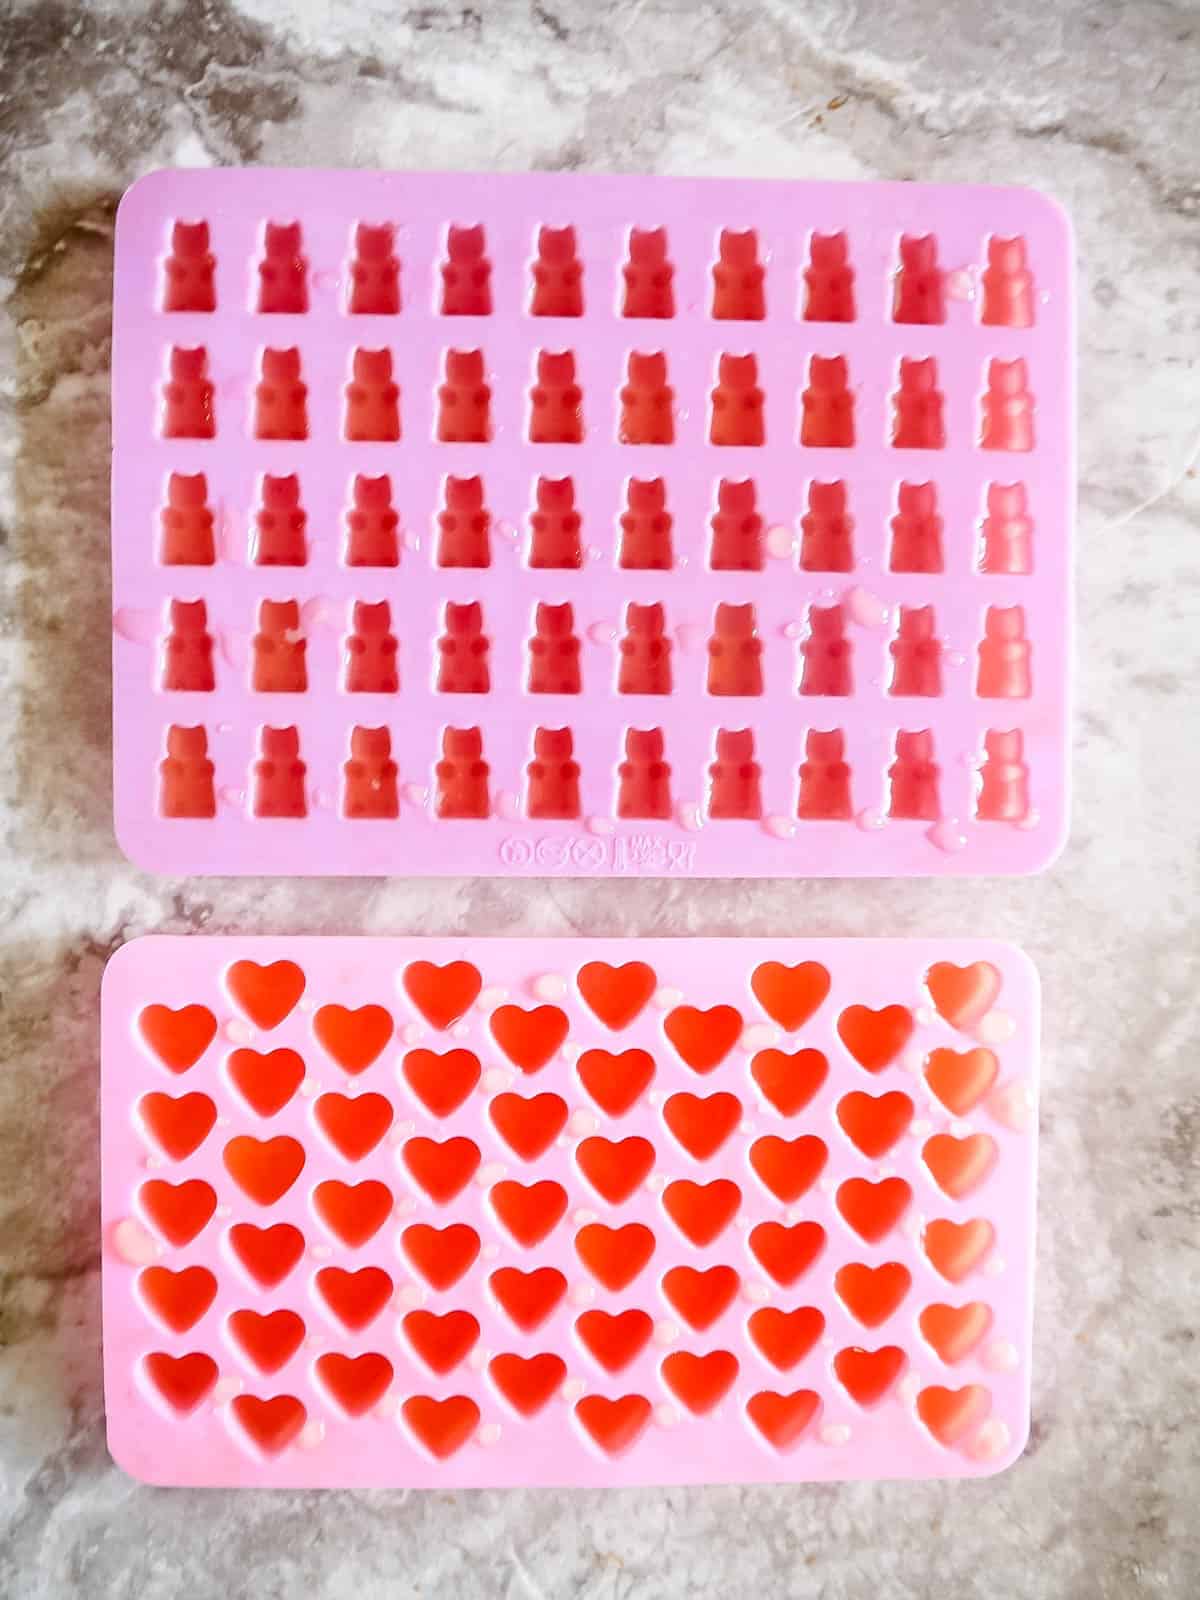 Apple gelatin mixture in silicone molds.